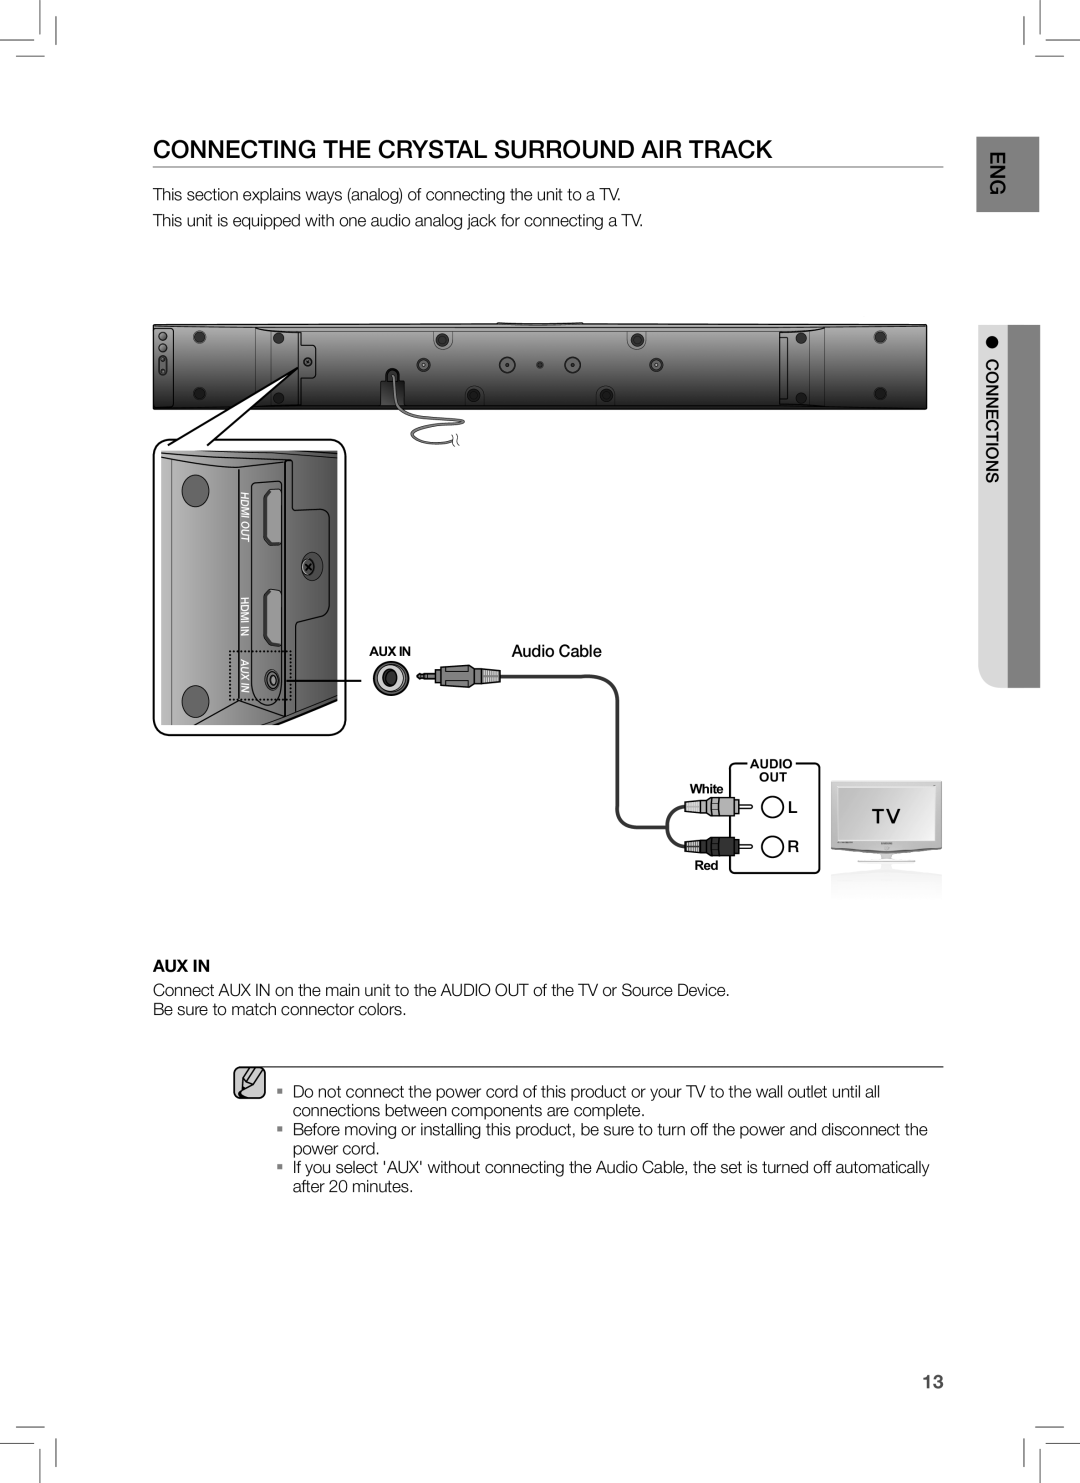 Samsung HW-E350 user manual Connecting The Crystal Surround Air Track, Aux In 